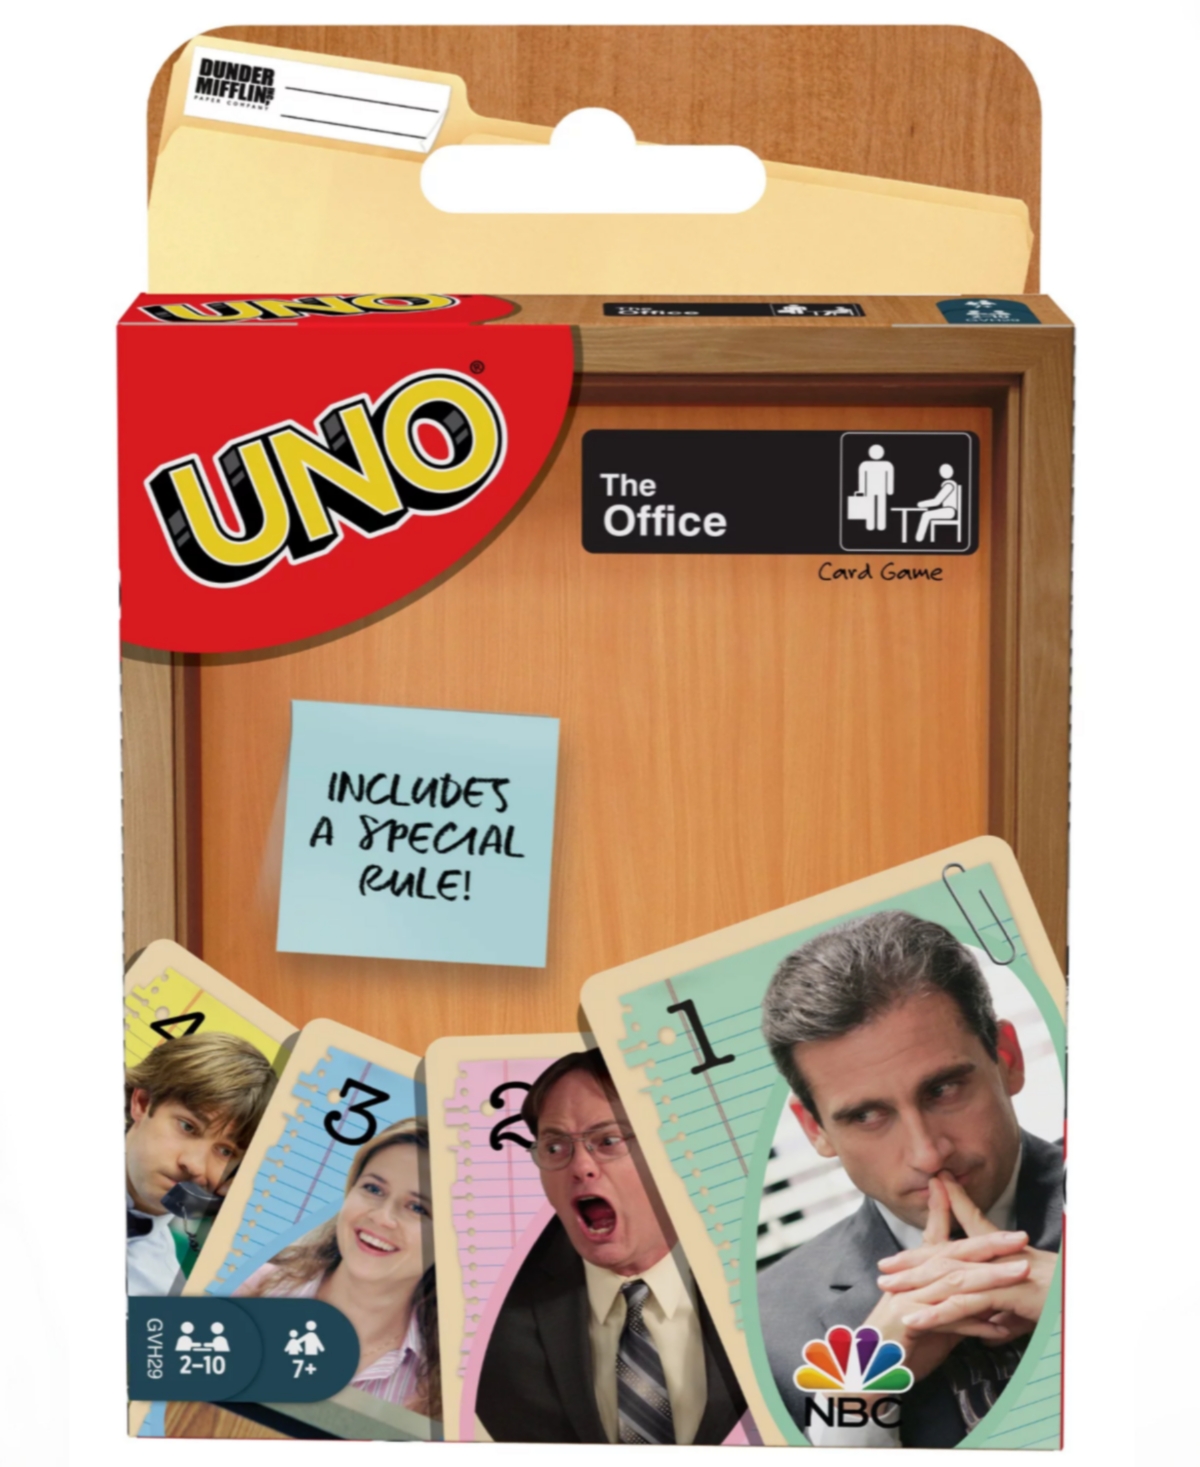 Mattel - The American Tv Show The Office Uno Card Family Game Night In Multi